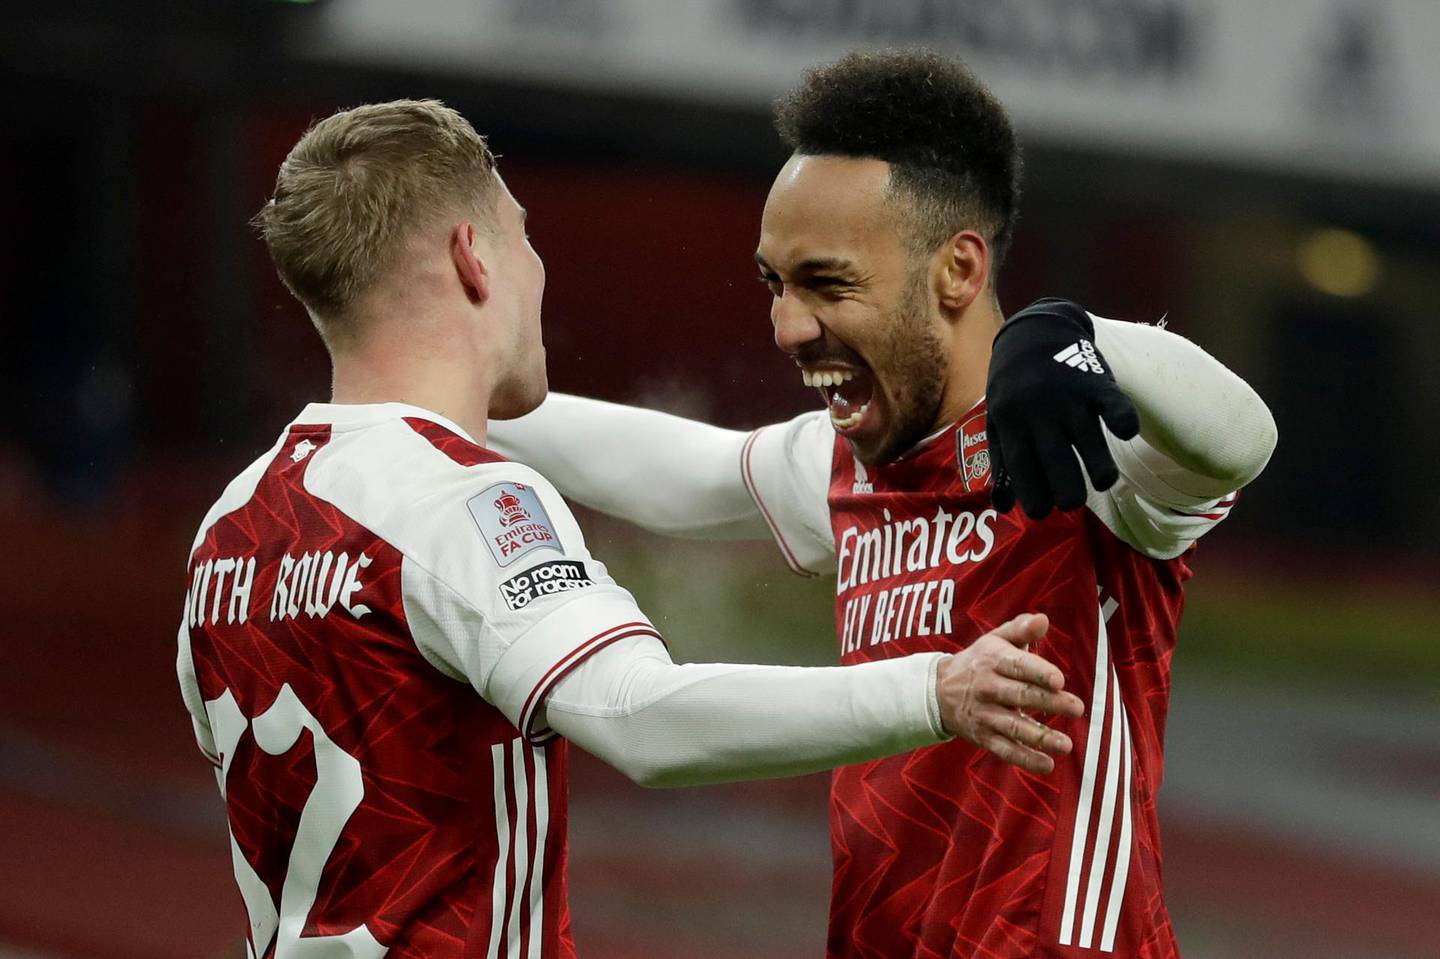 Arsenal's Emile Smith Rowe, left, celebrates with Pierre-Emerick Aubameyang after scoring the opening goal during the English FA Cup third round soccer match between Arsenal and Newcastle United at the Emirates Stadium in London, England, Saturday, Jan. 9, 2020. (AP Photo/Matt Dunham)